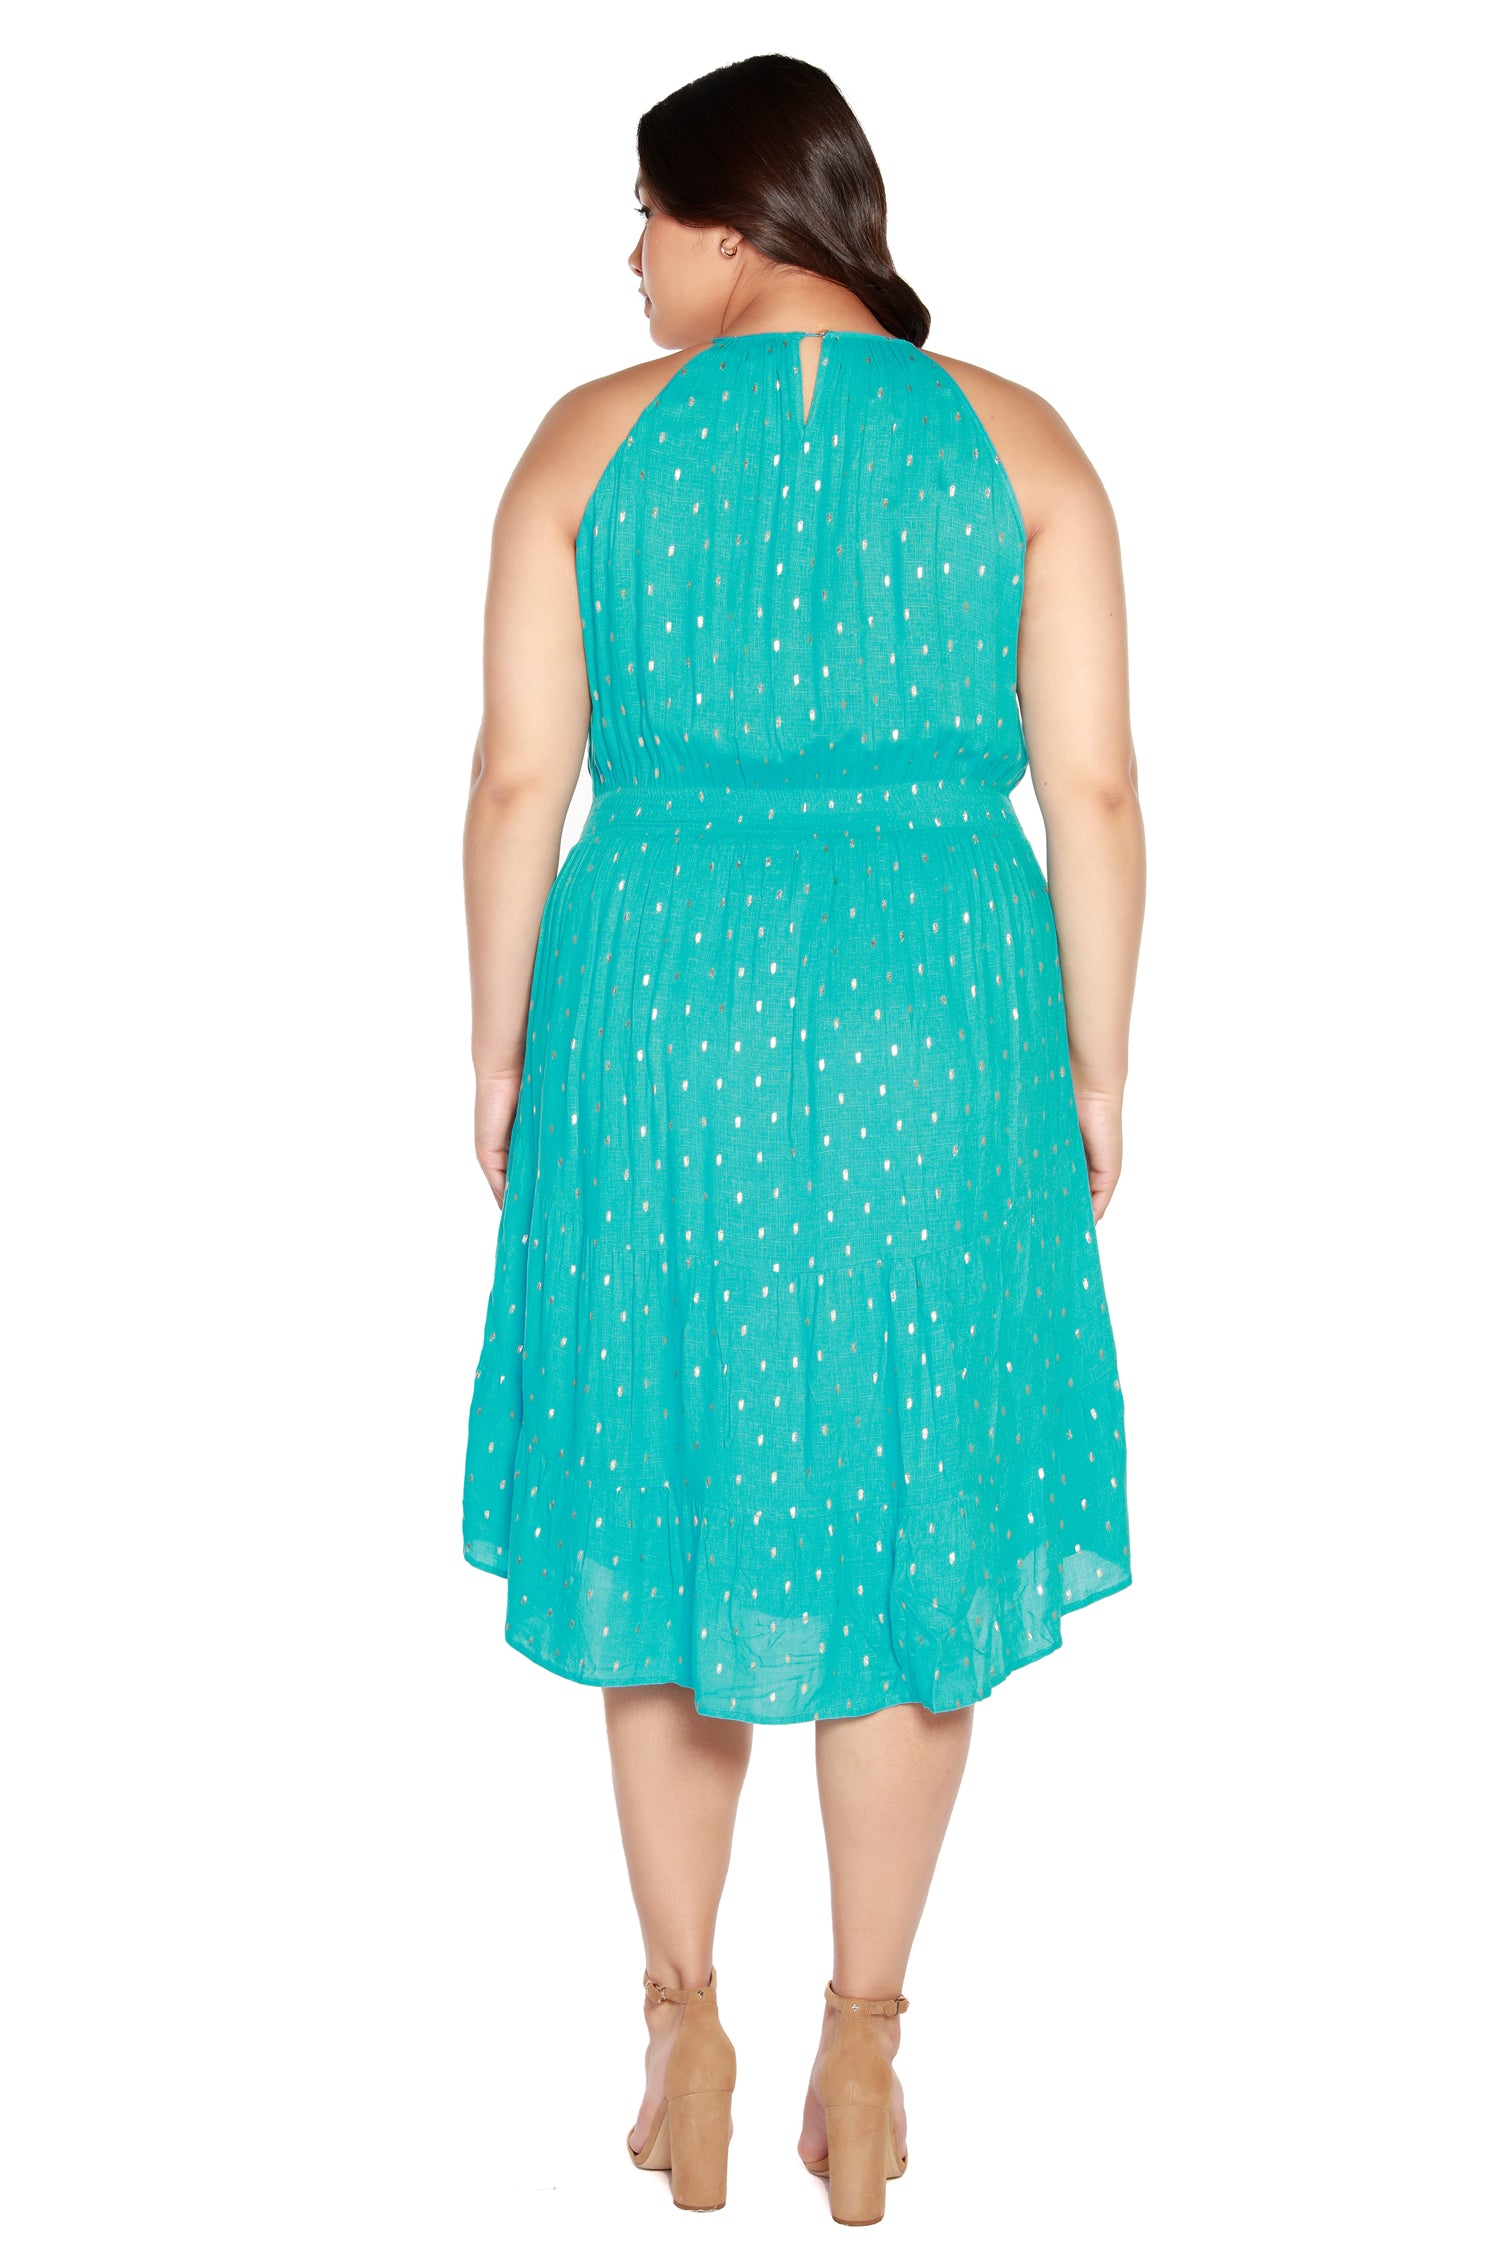 Women’s Sleeveless Dress with Tiered Skirt and High-Low Hem | Curvy